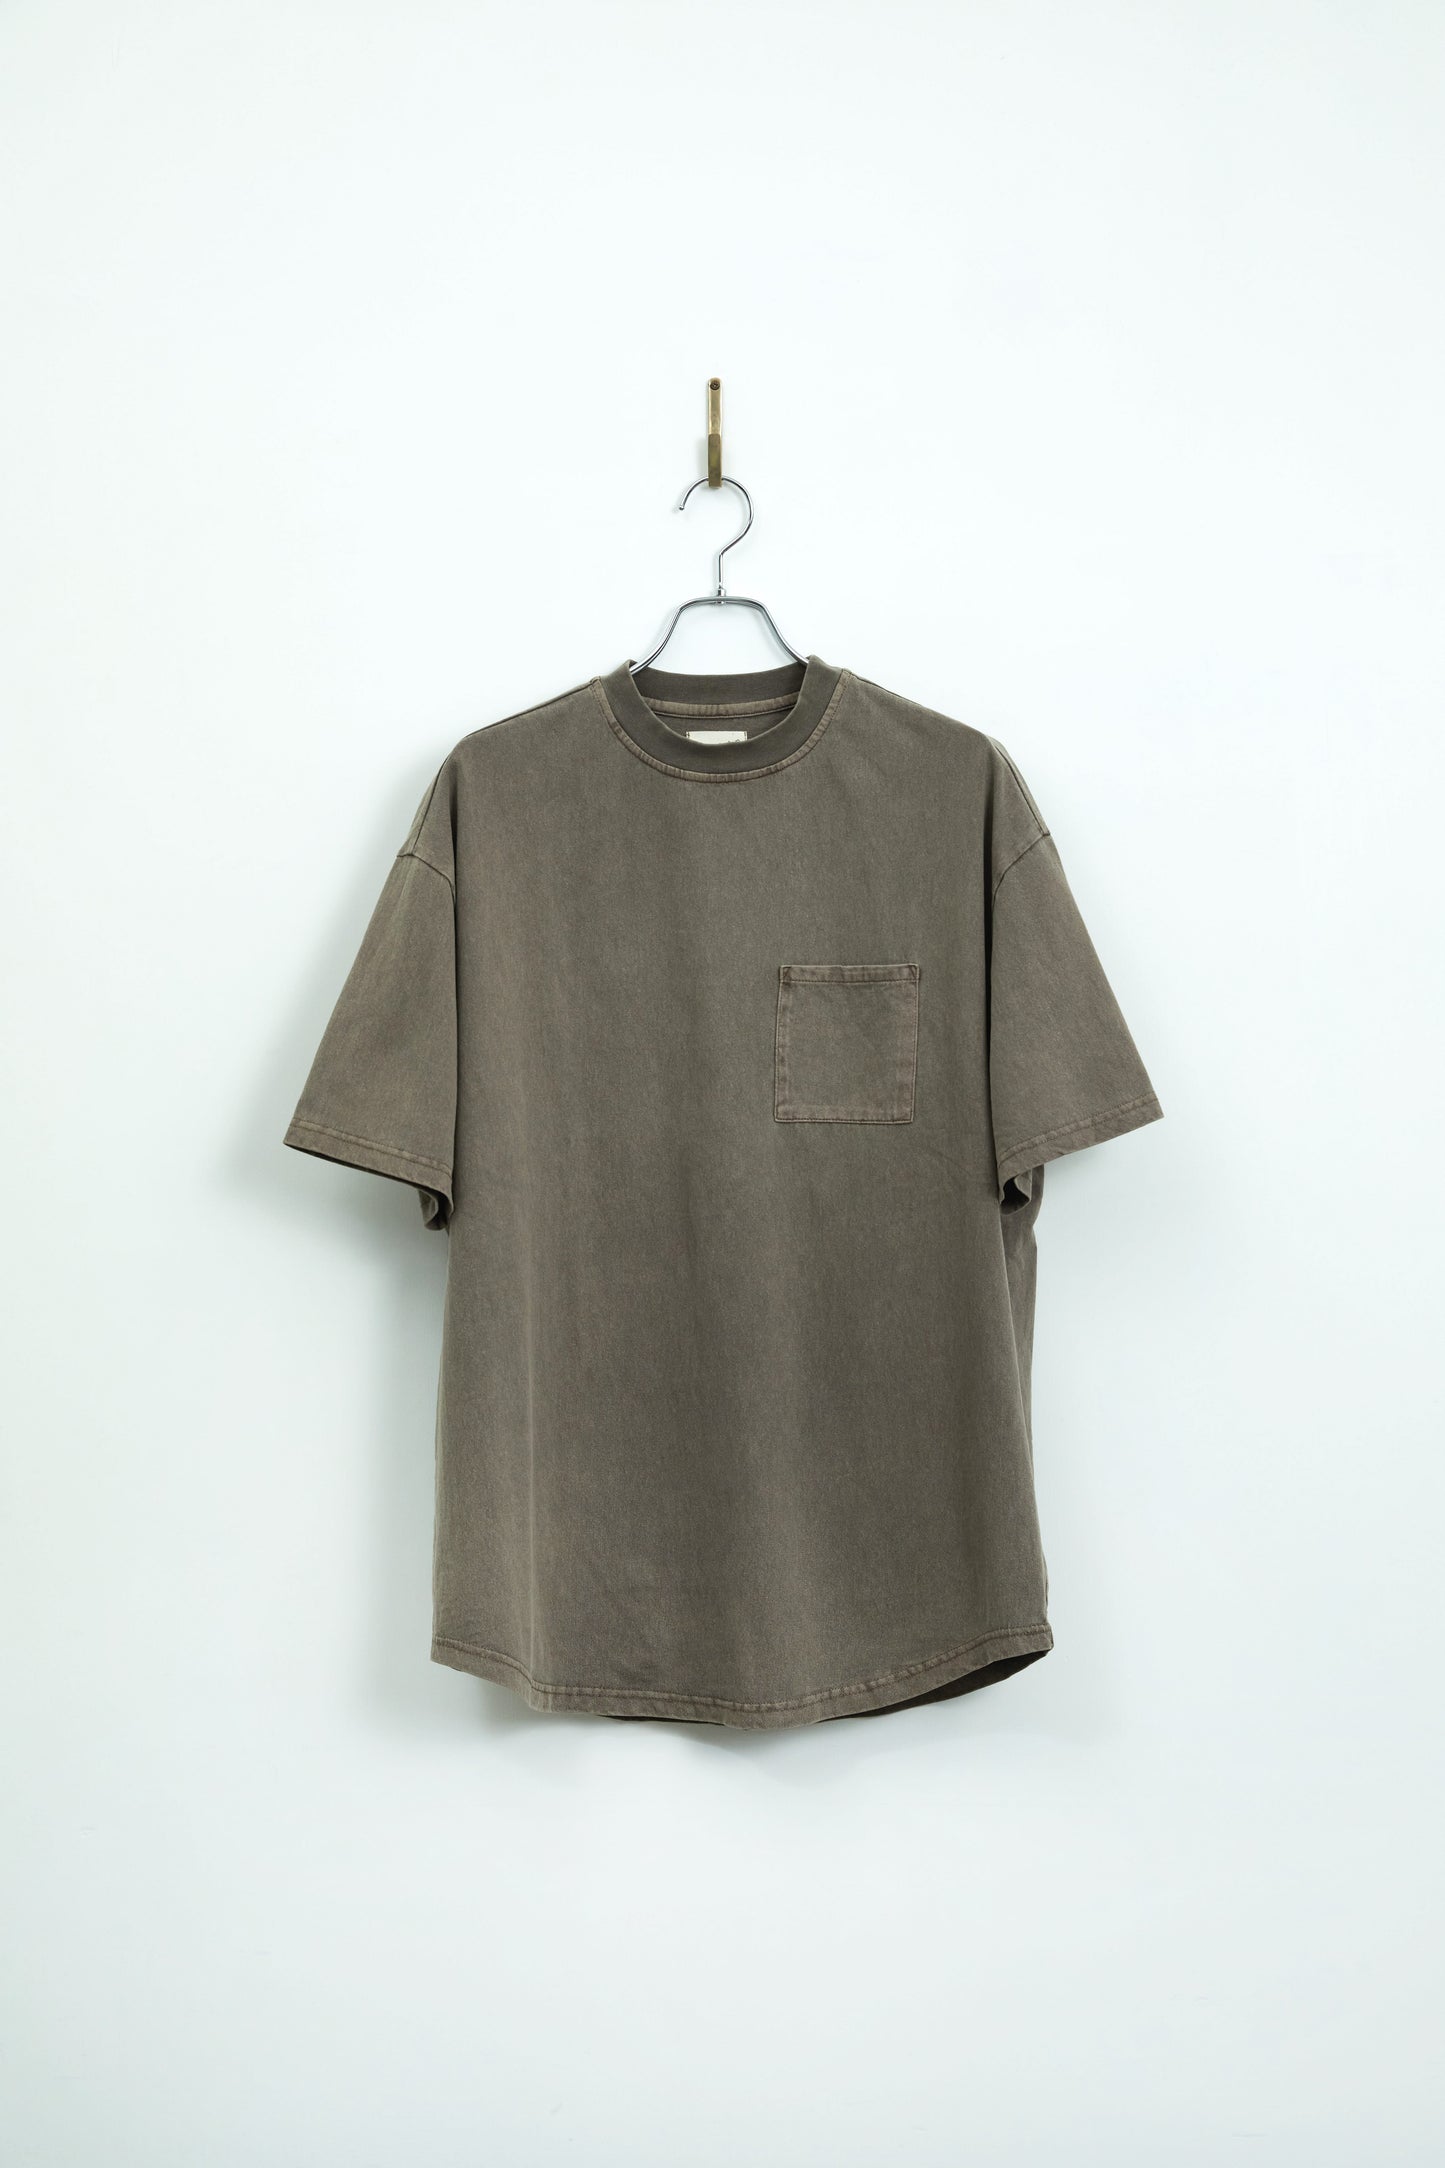 By R SS22 S/S Curve Pocket Tee